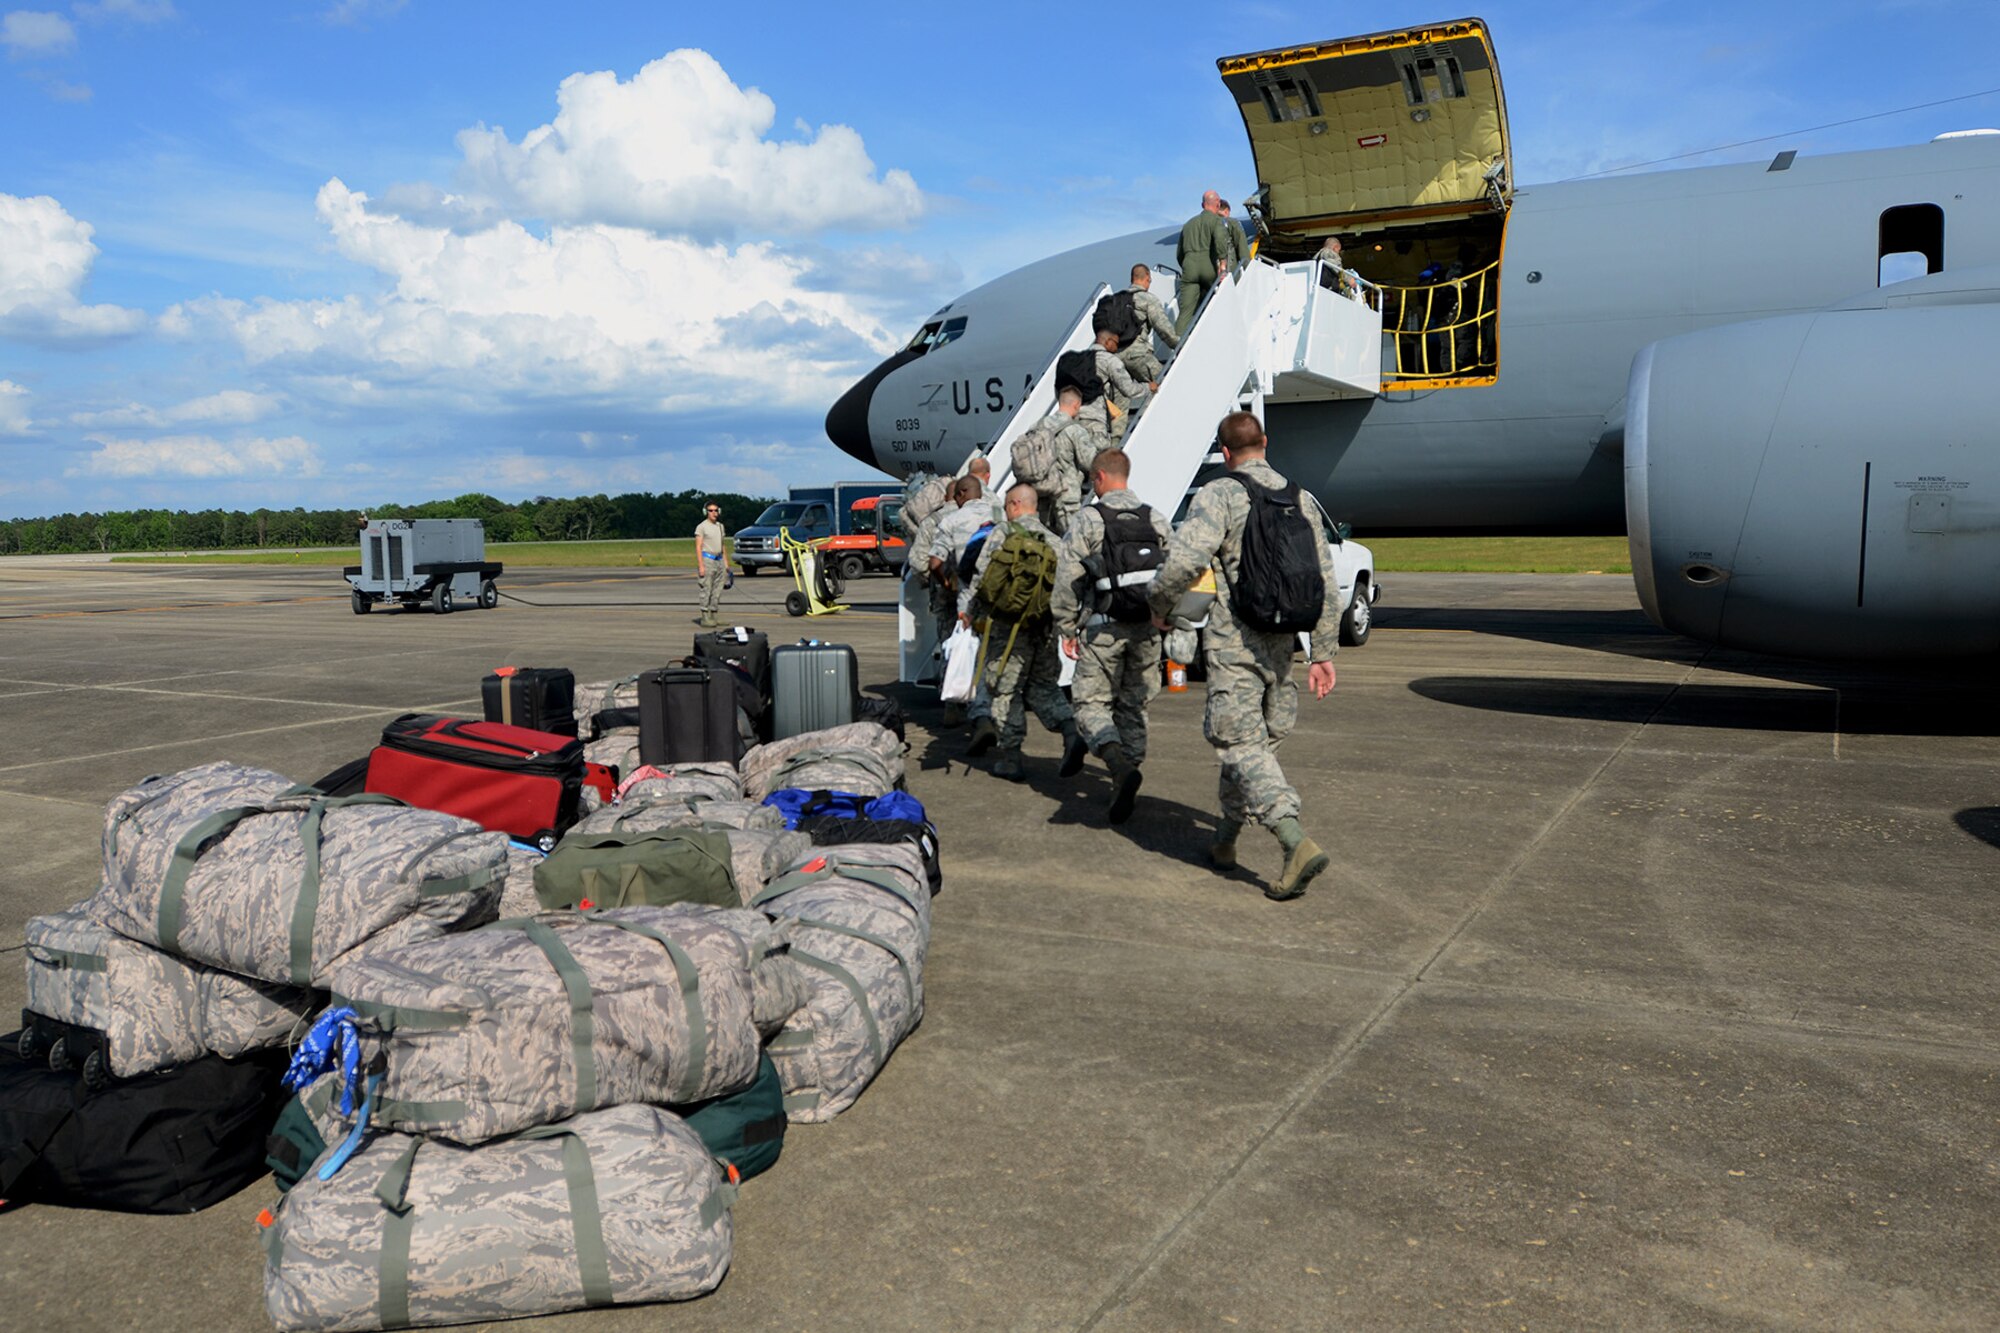 U.S. Airmen from the South Carolina Air National Guard’s 169th Fighter Wing at McEntire Joint National Guard Base, S.C., load a KC-135 Stratotanker from Tinker Air Force Base, Okla., to deploy in support of Operation Atlantic Resolve at Łask Air Base, Poland, May 26, 2015. (U,S. Air National Guard photo by Tech. Sgt. Caycee Watson/RELEASED)